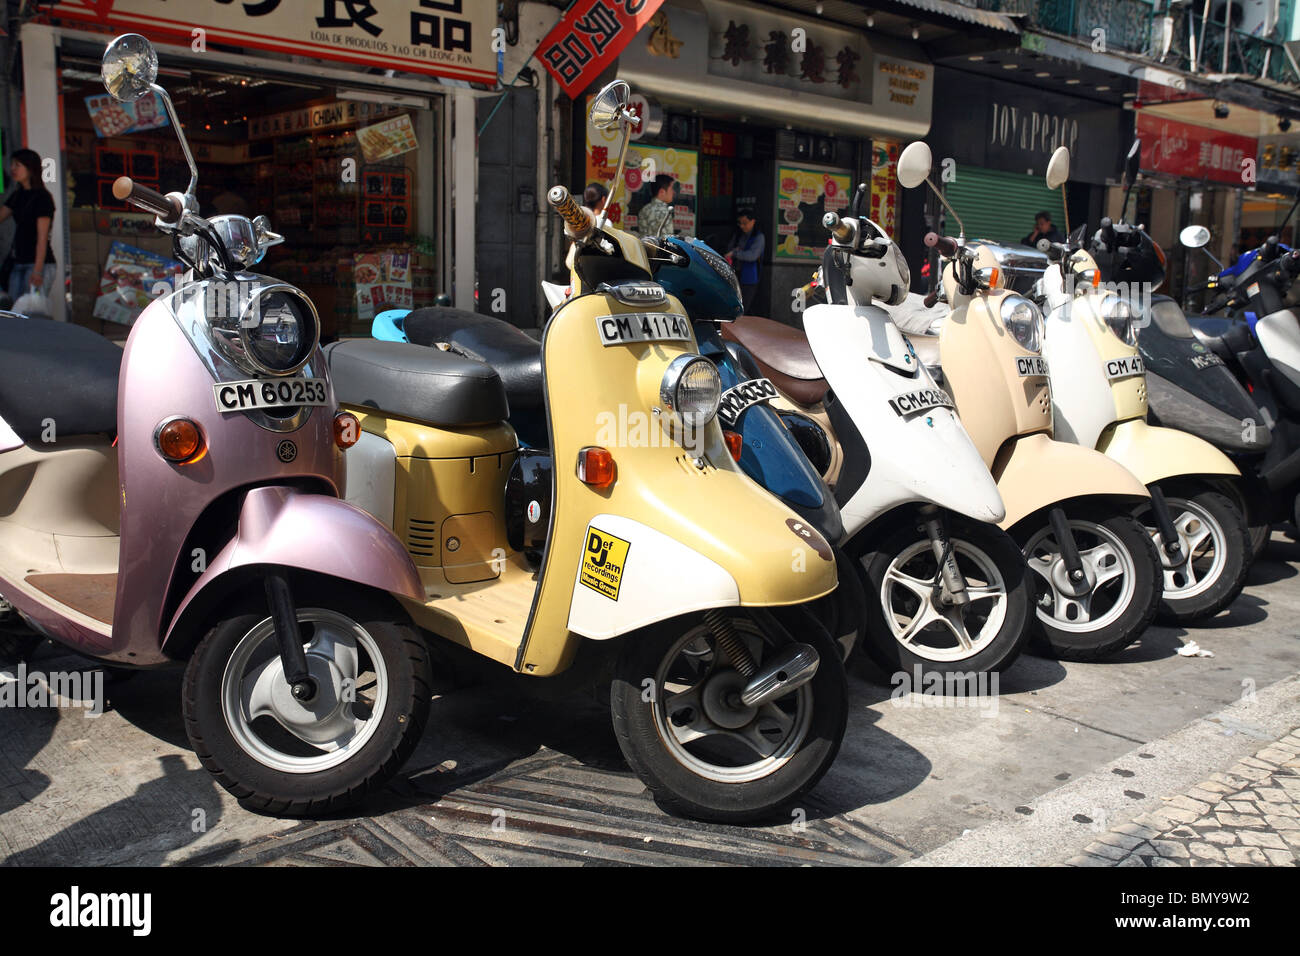 Scooters parked in a street, Macao, China Stock Photo